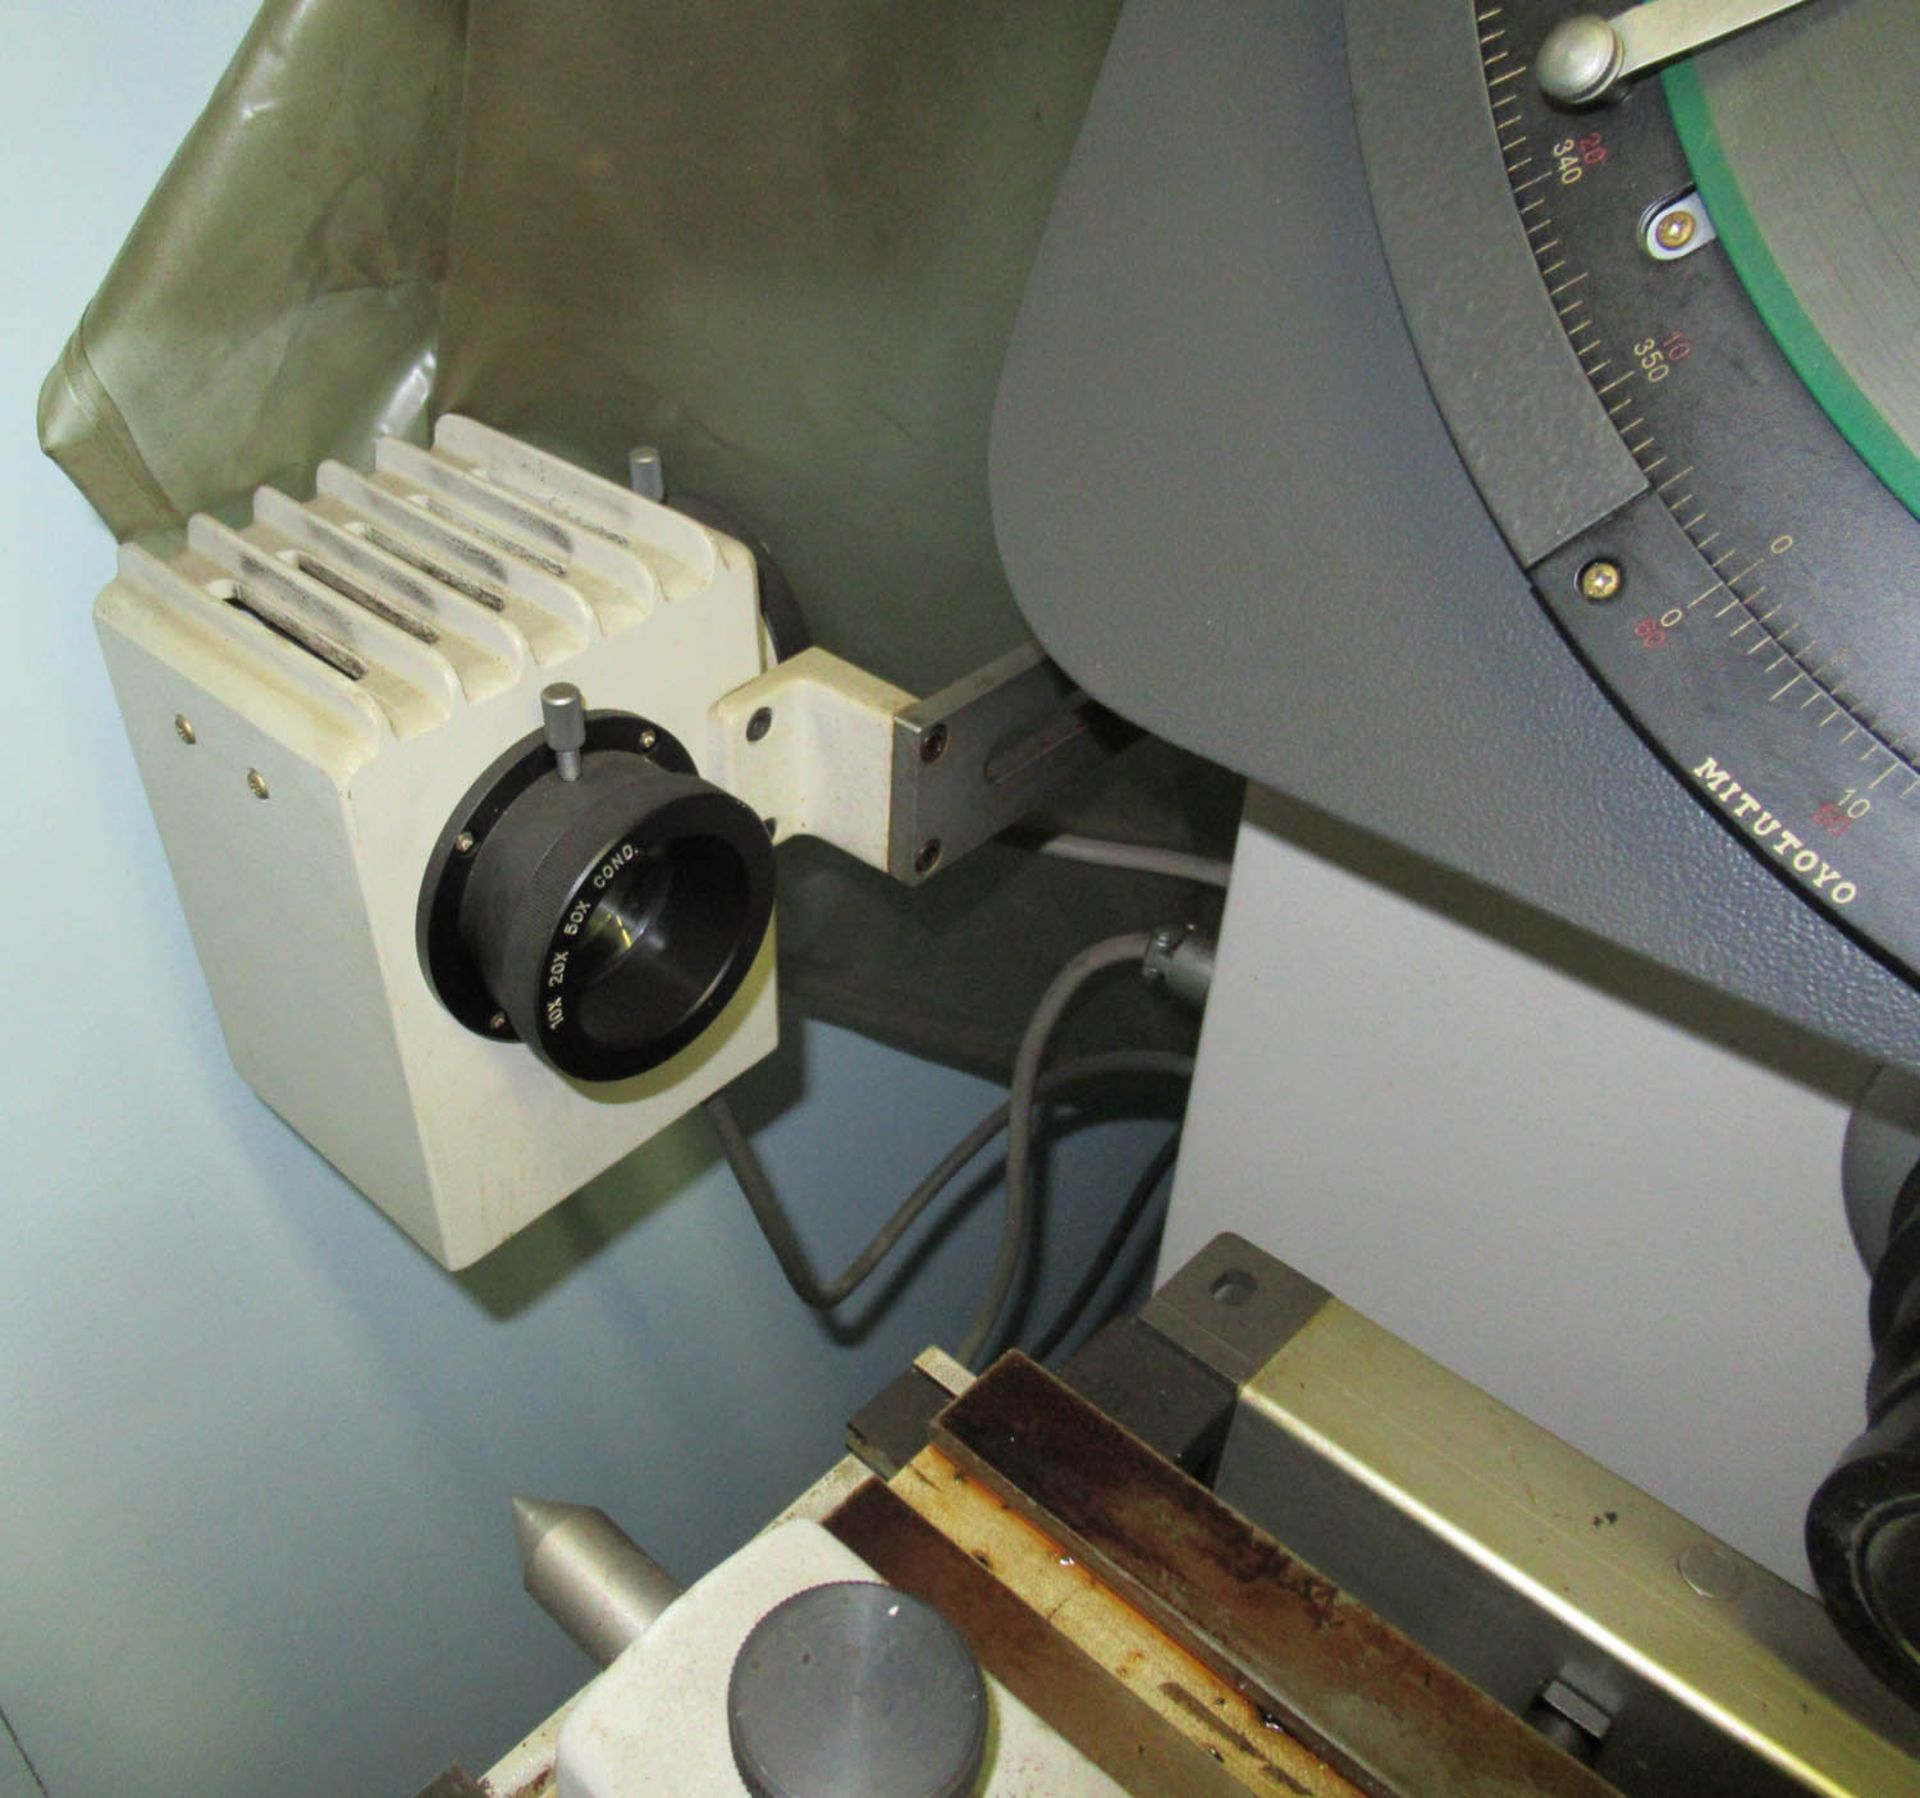 13" MITUTOYO PH-350 COMPARATOR, SURFACE ILLUMINATION, 5-7/8" X 15-3/4" TABLE, MITUTOYO 2-AXIS - Image 4 of 6